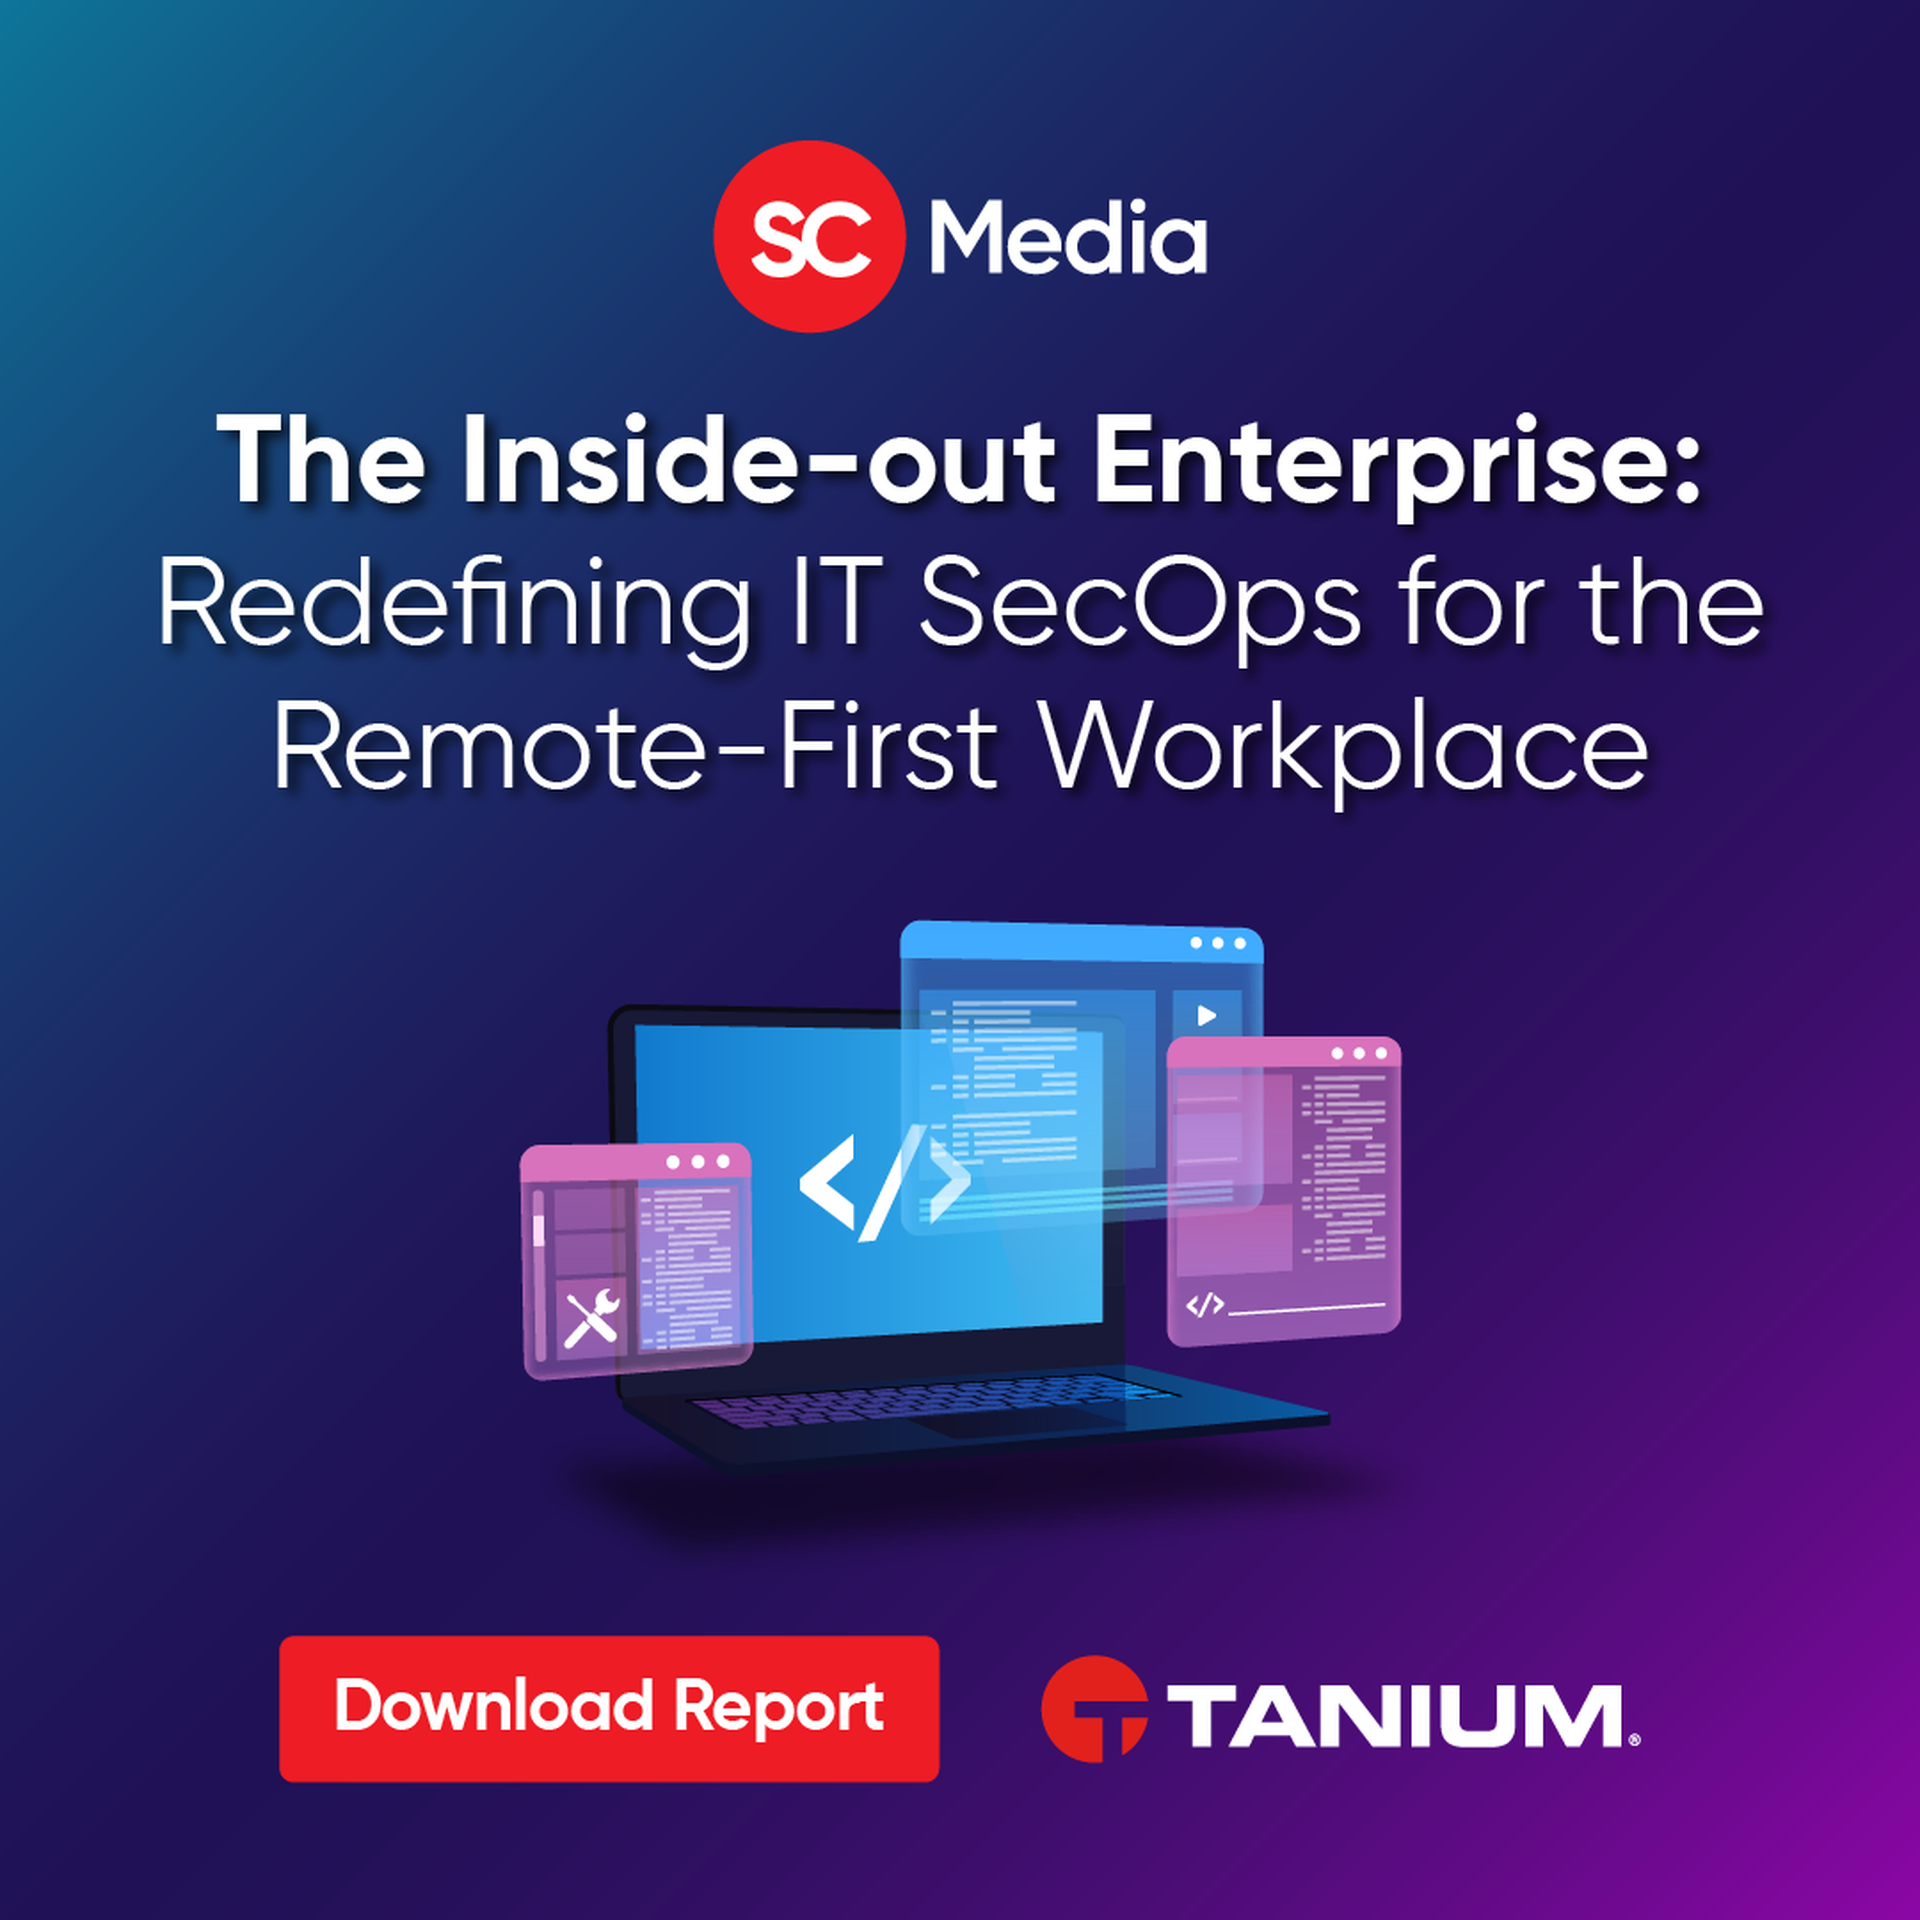 The Inside-out Enterprise: Redefining IT SecOps for the Remote-First Workplace